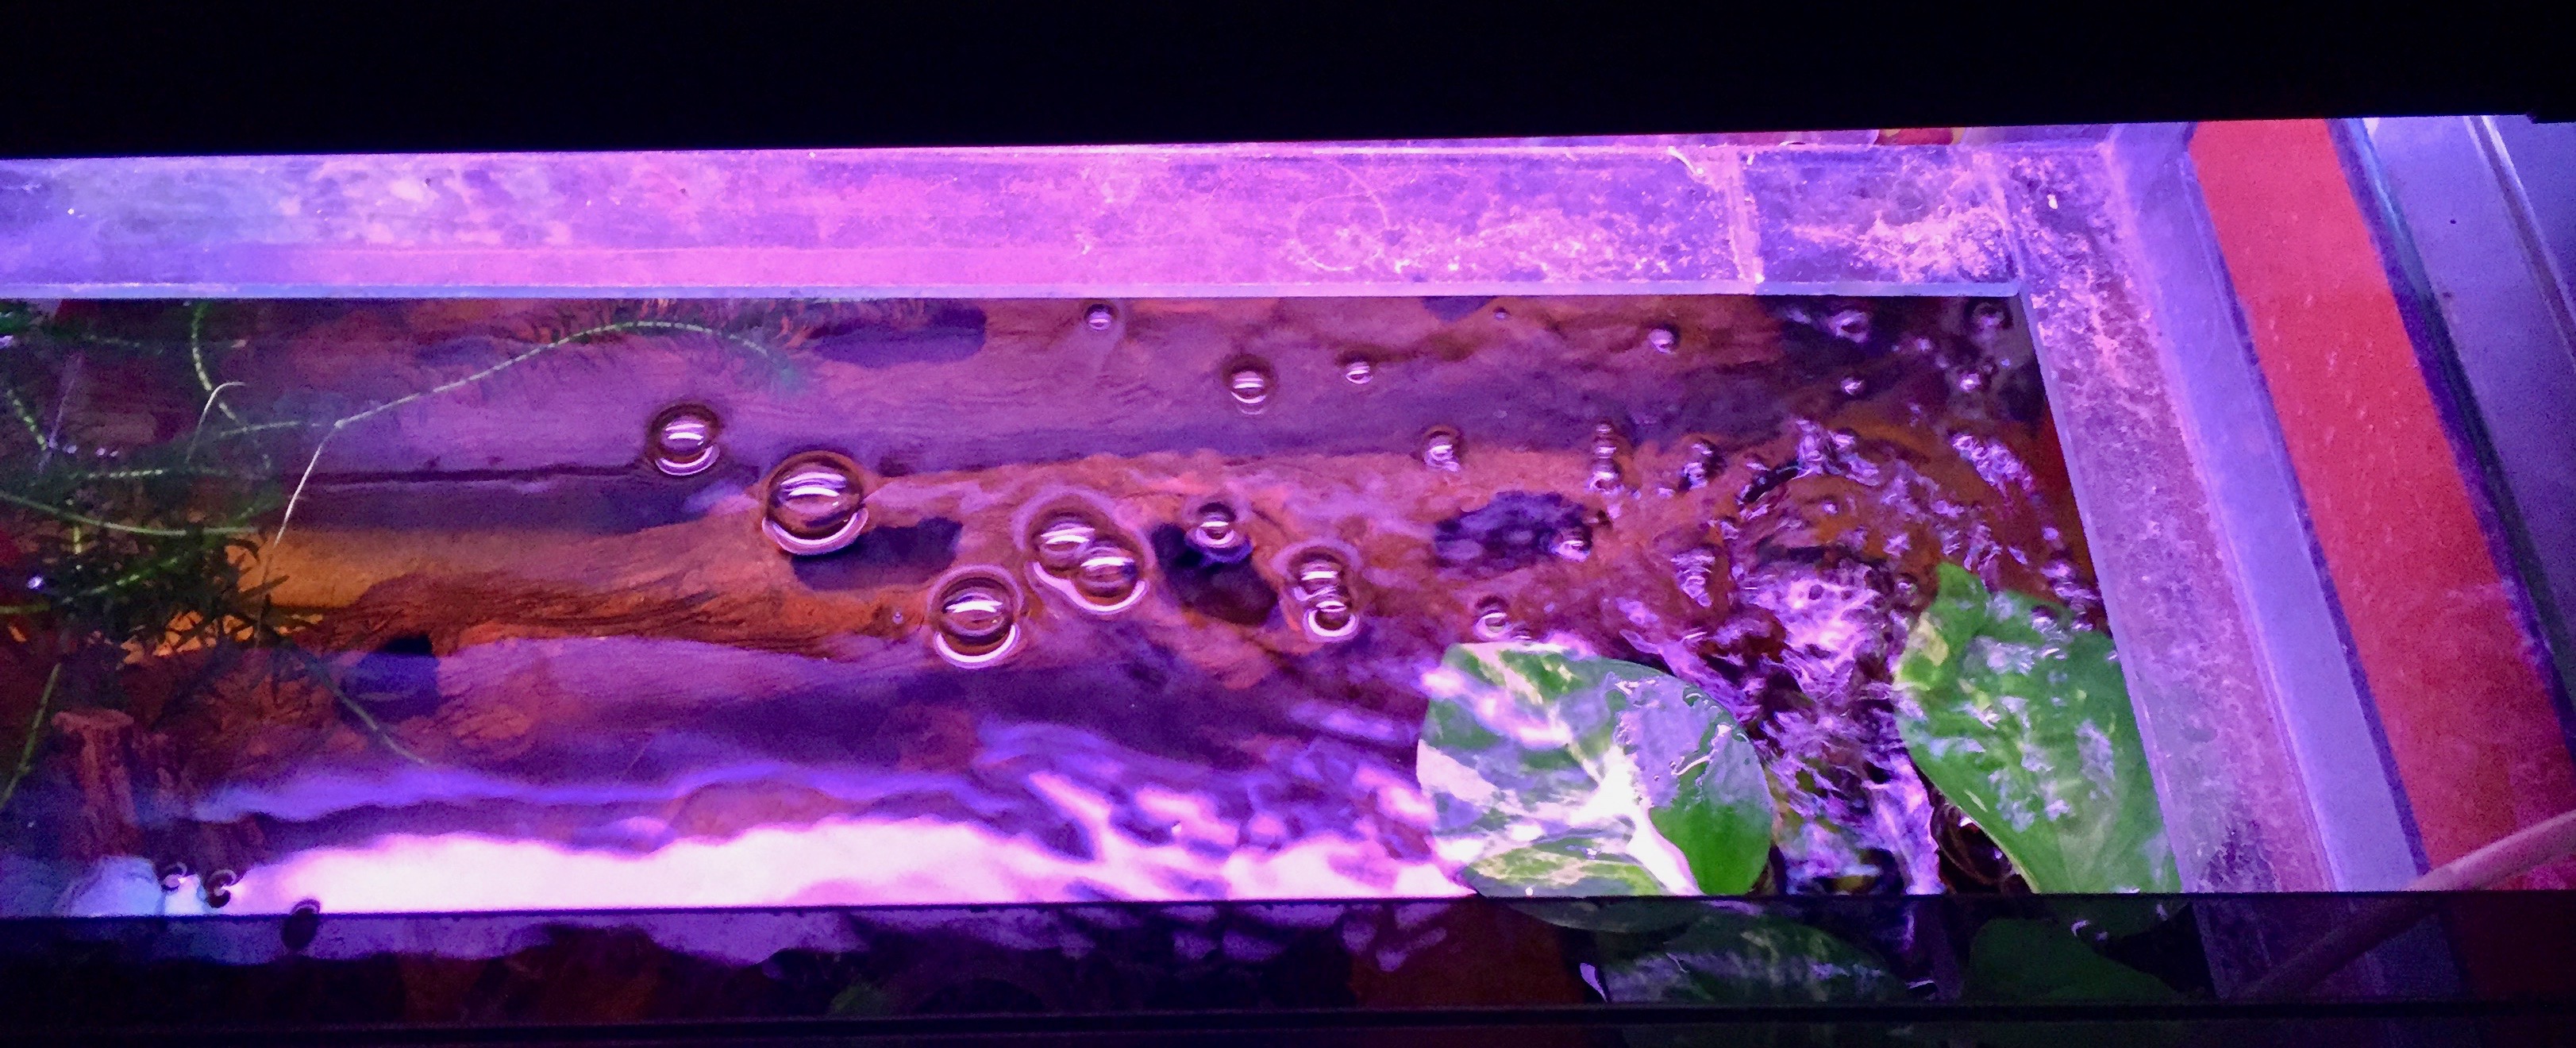 Water bubbles and plants in a tank